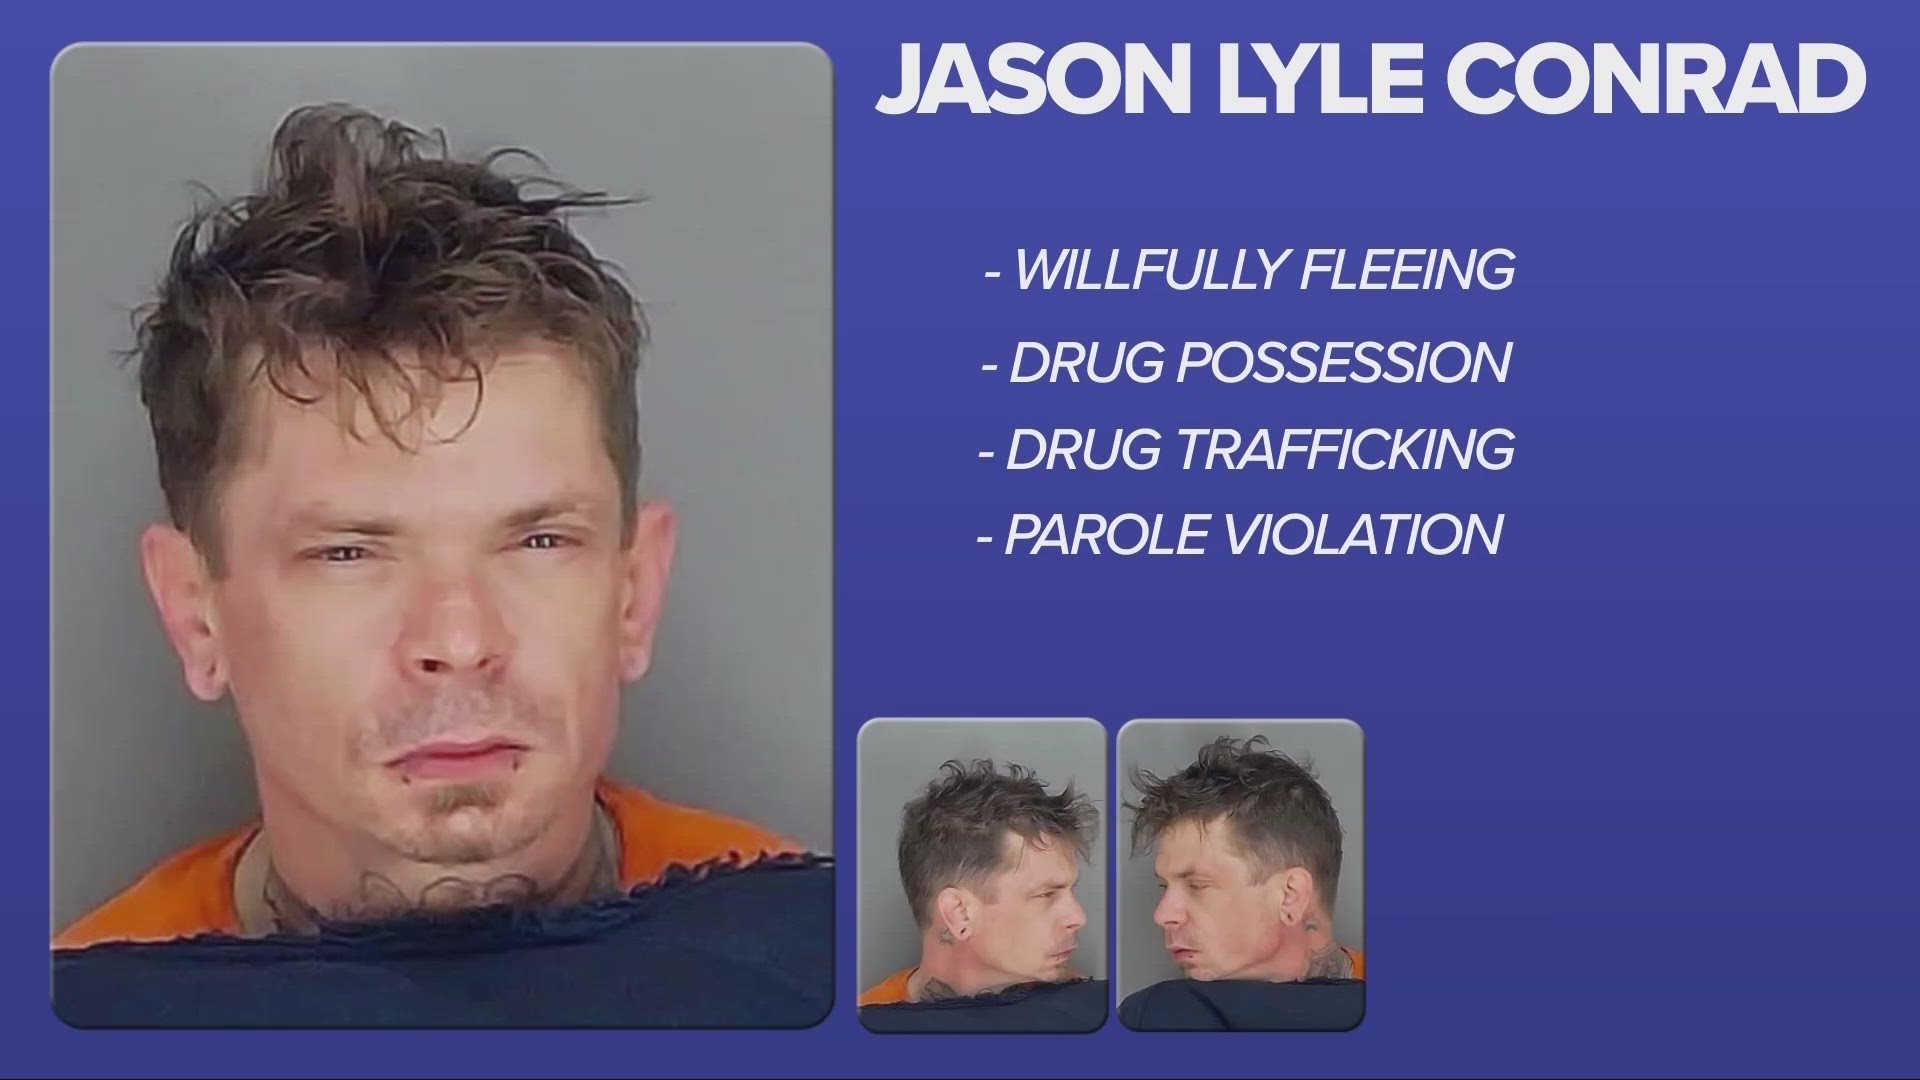 The Summit County Sheriff’s Office says the inmate has charges of willfully fleeing, possession of drugs, trafficking in drugs and a parole violation.